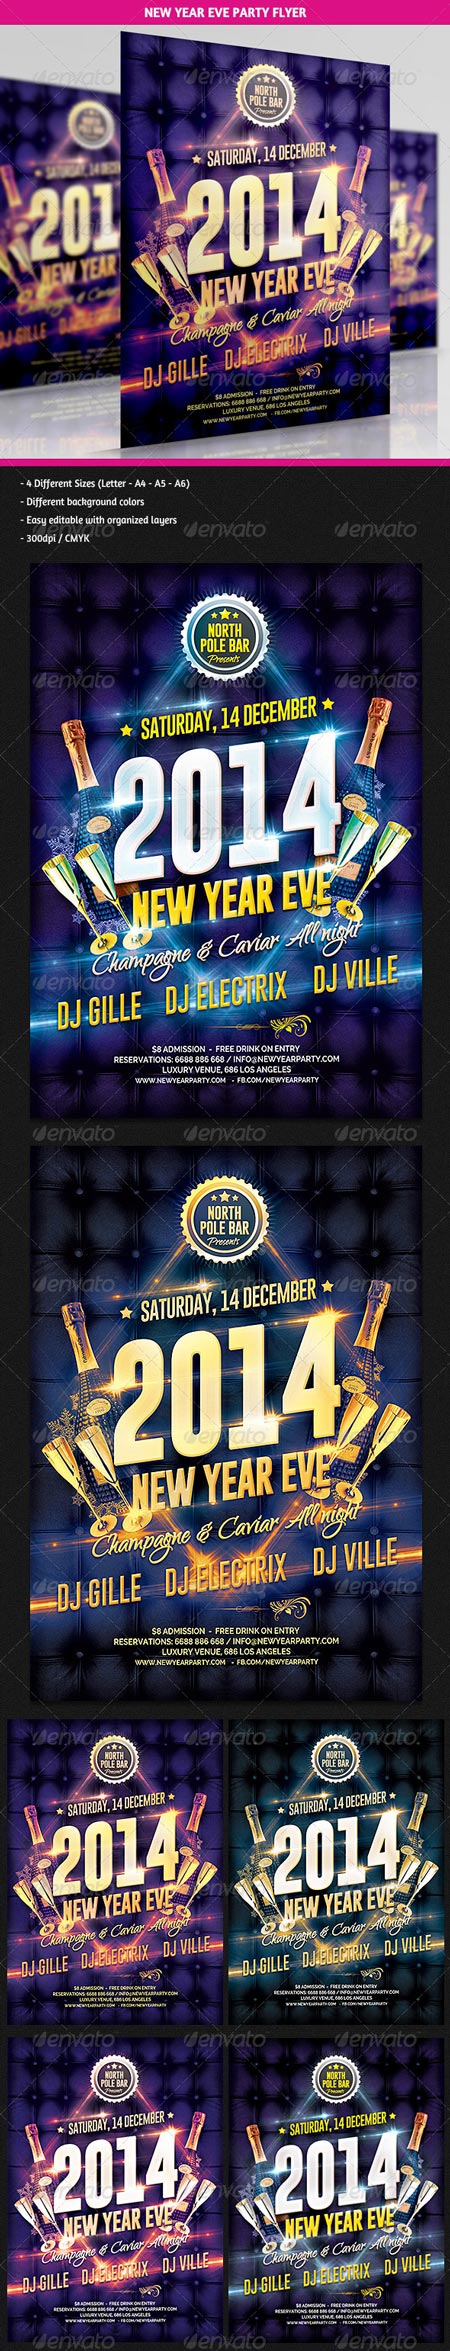 GraphicRiver New Year Eve Party Flyer 6265417